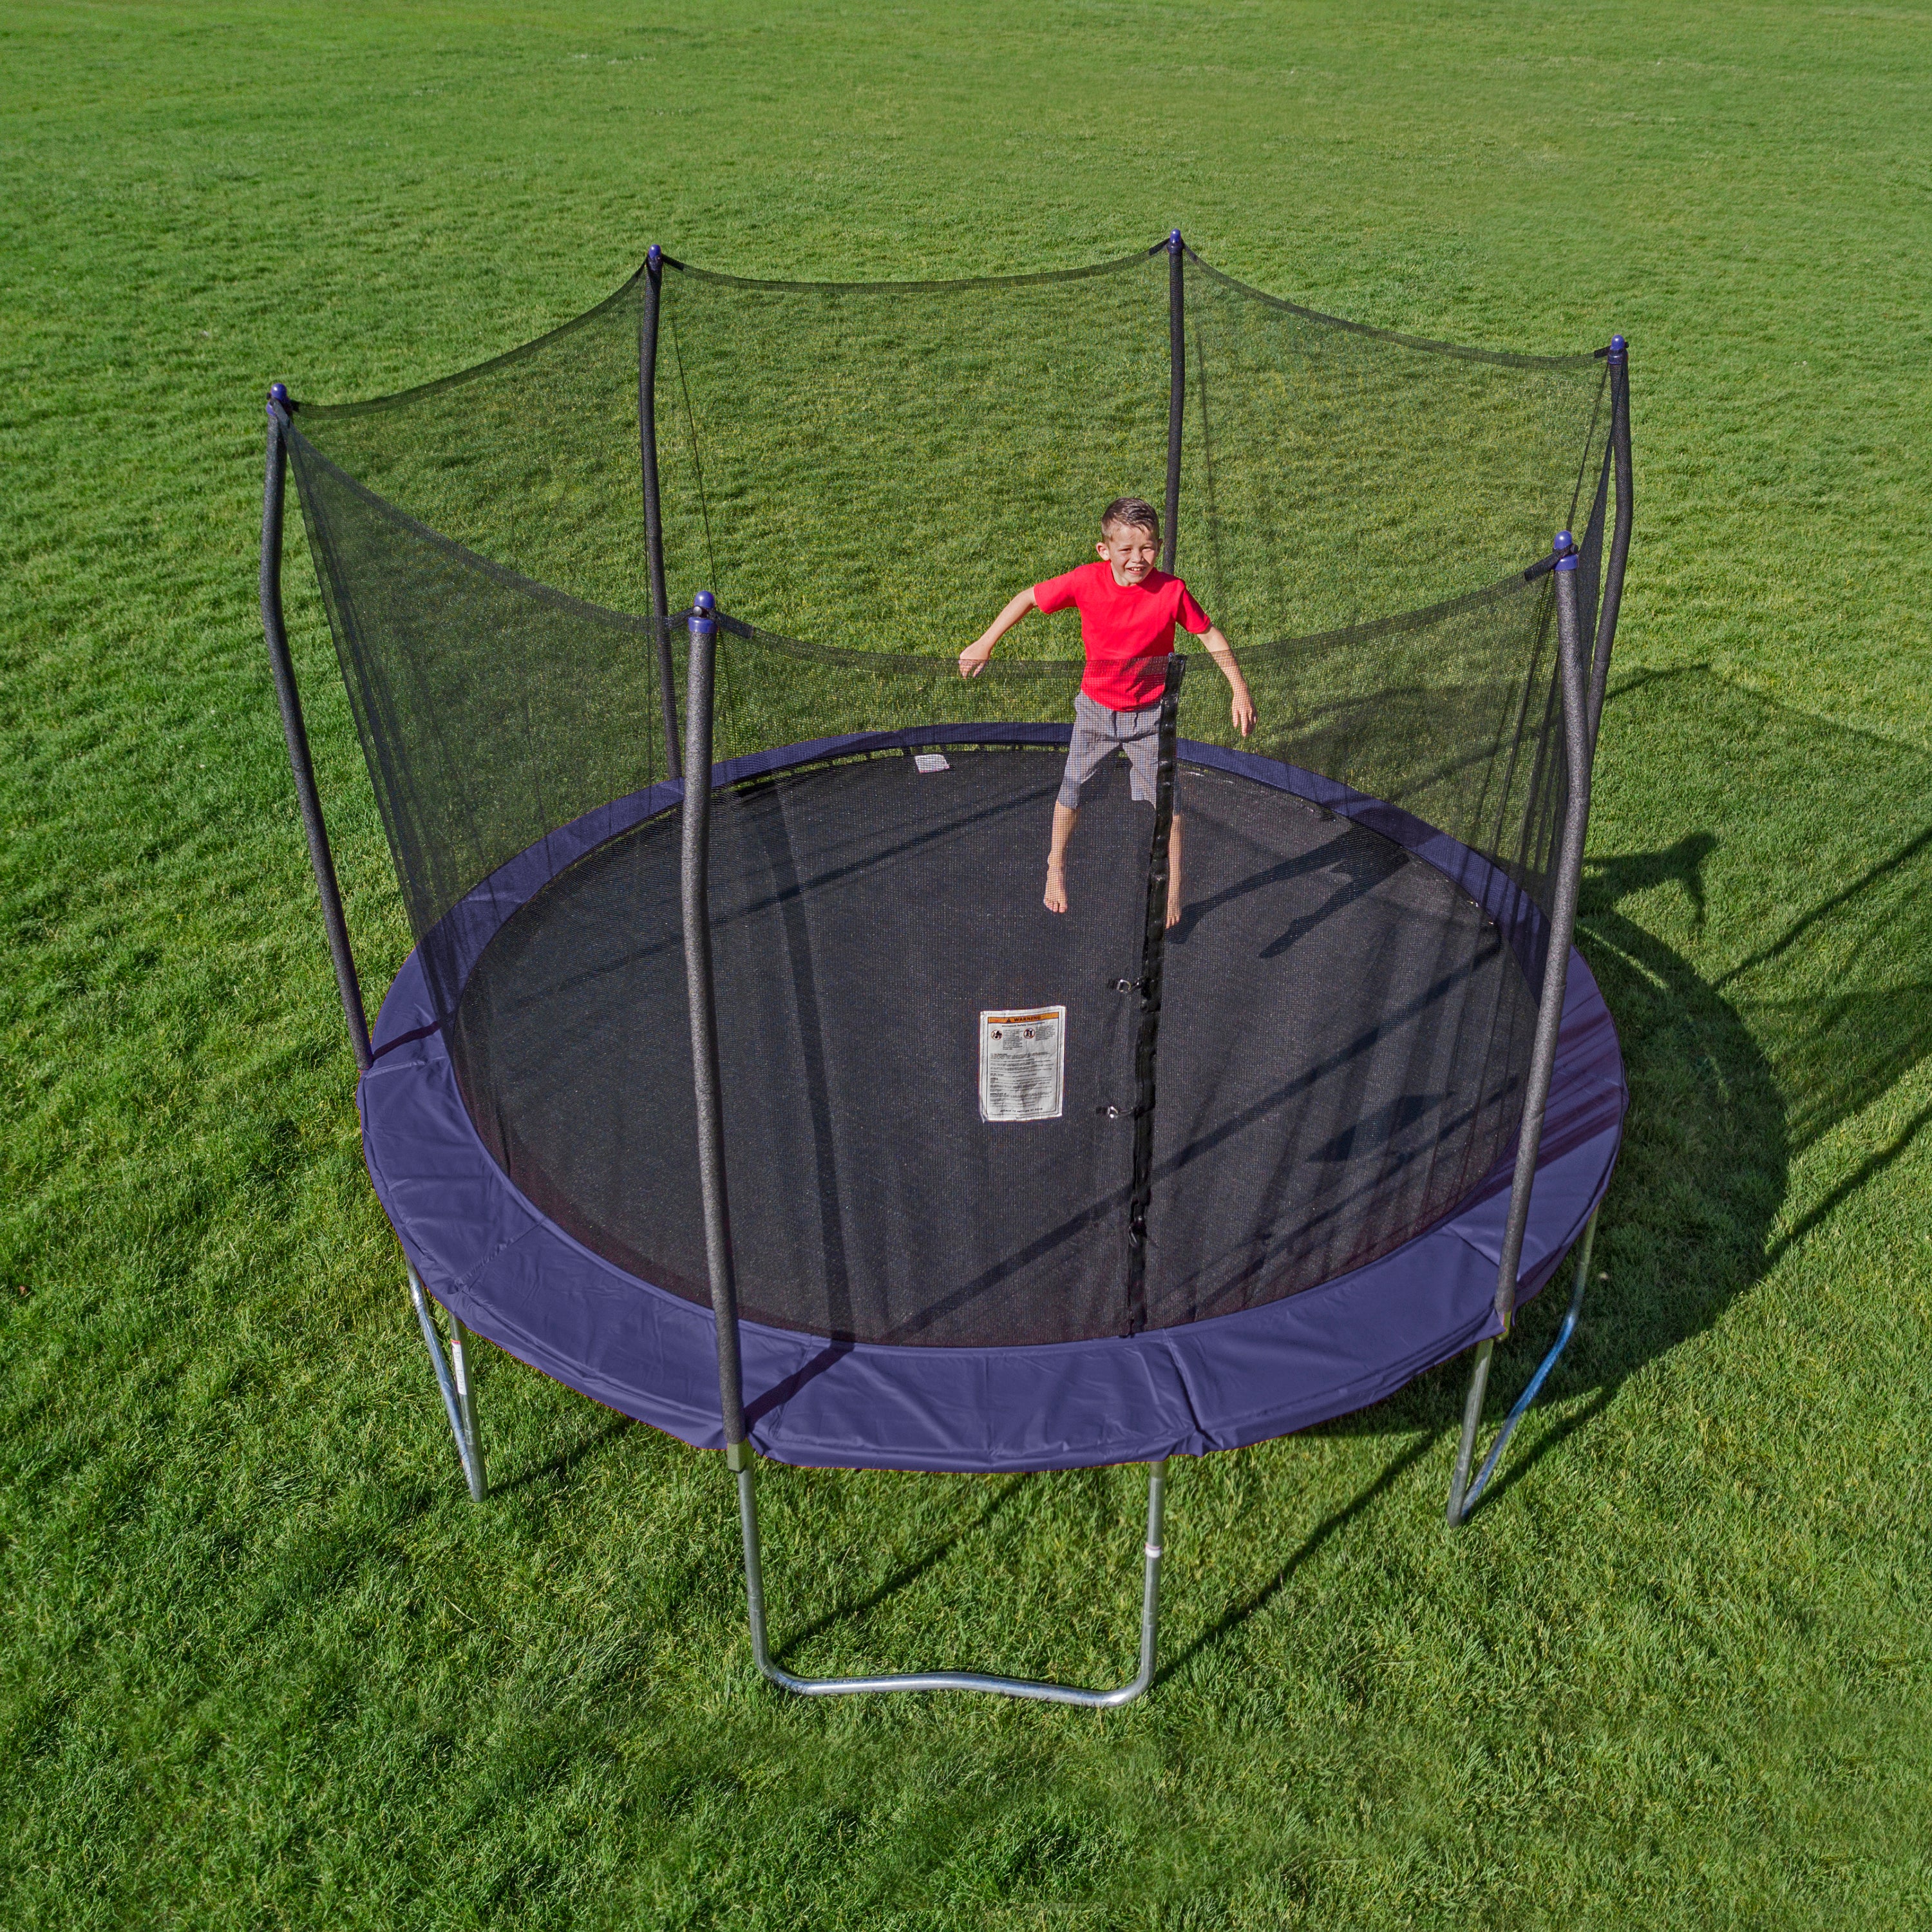 Young boy grins while bouncing on the 13-foot round trampoline with navy spring pad.